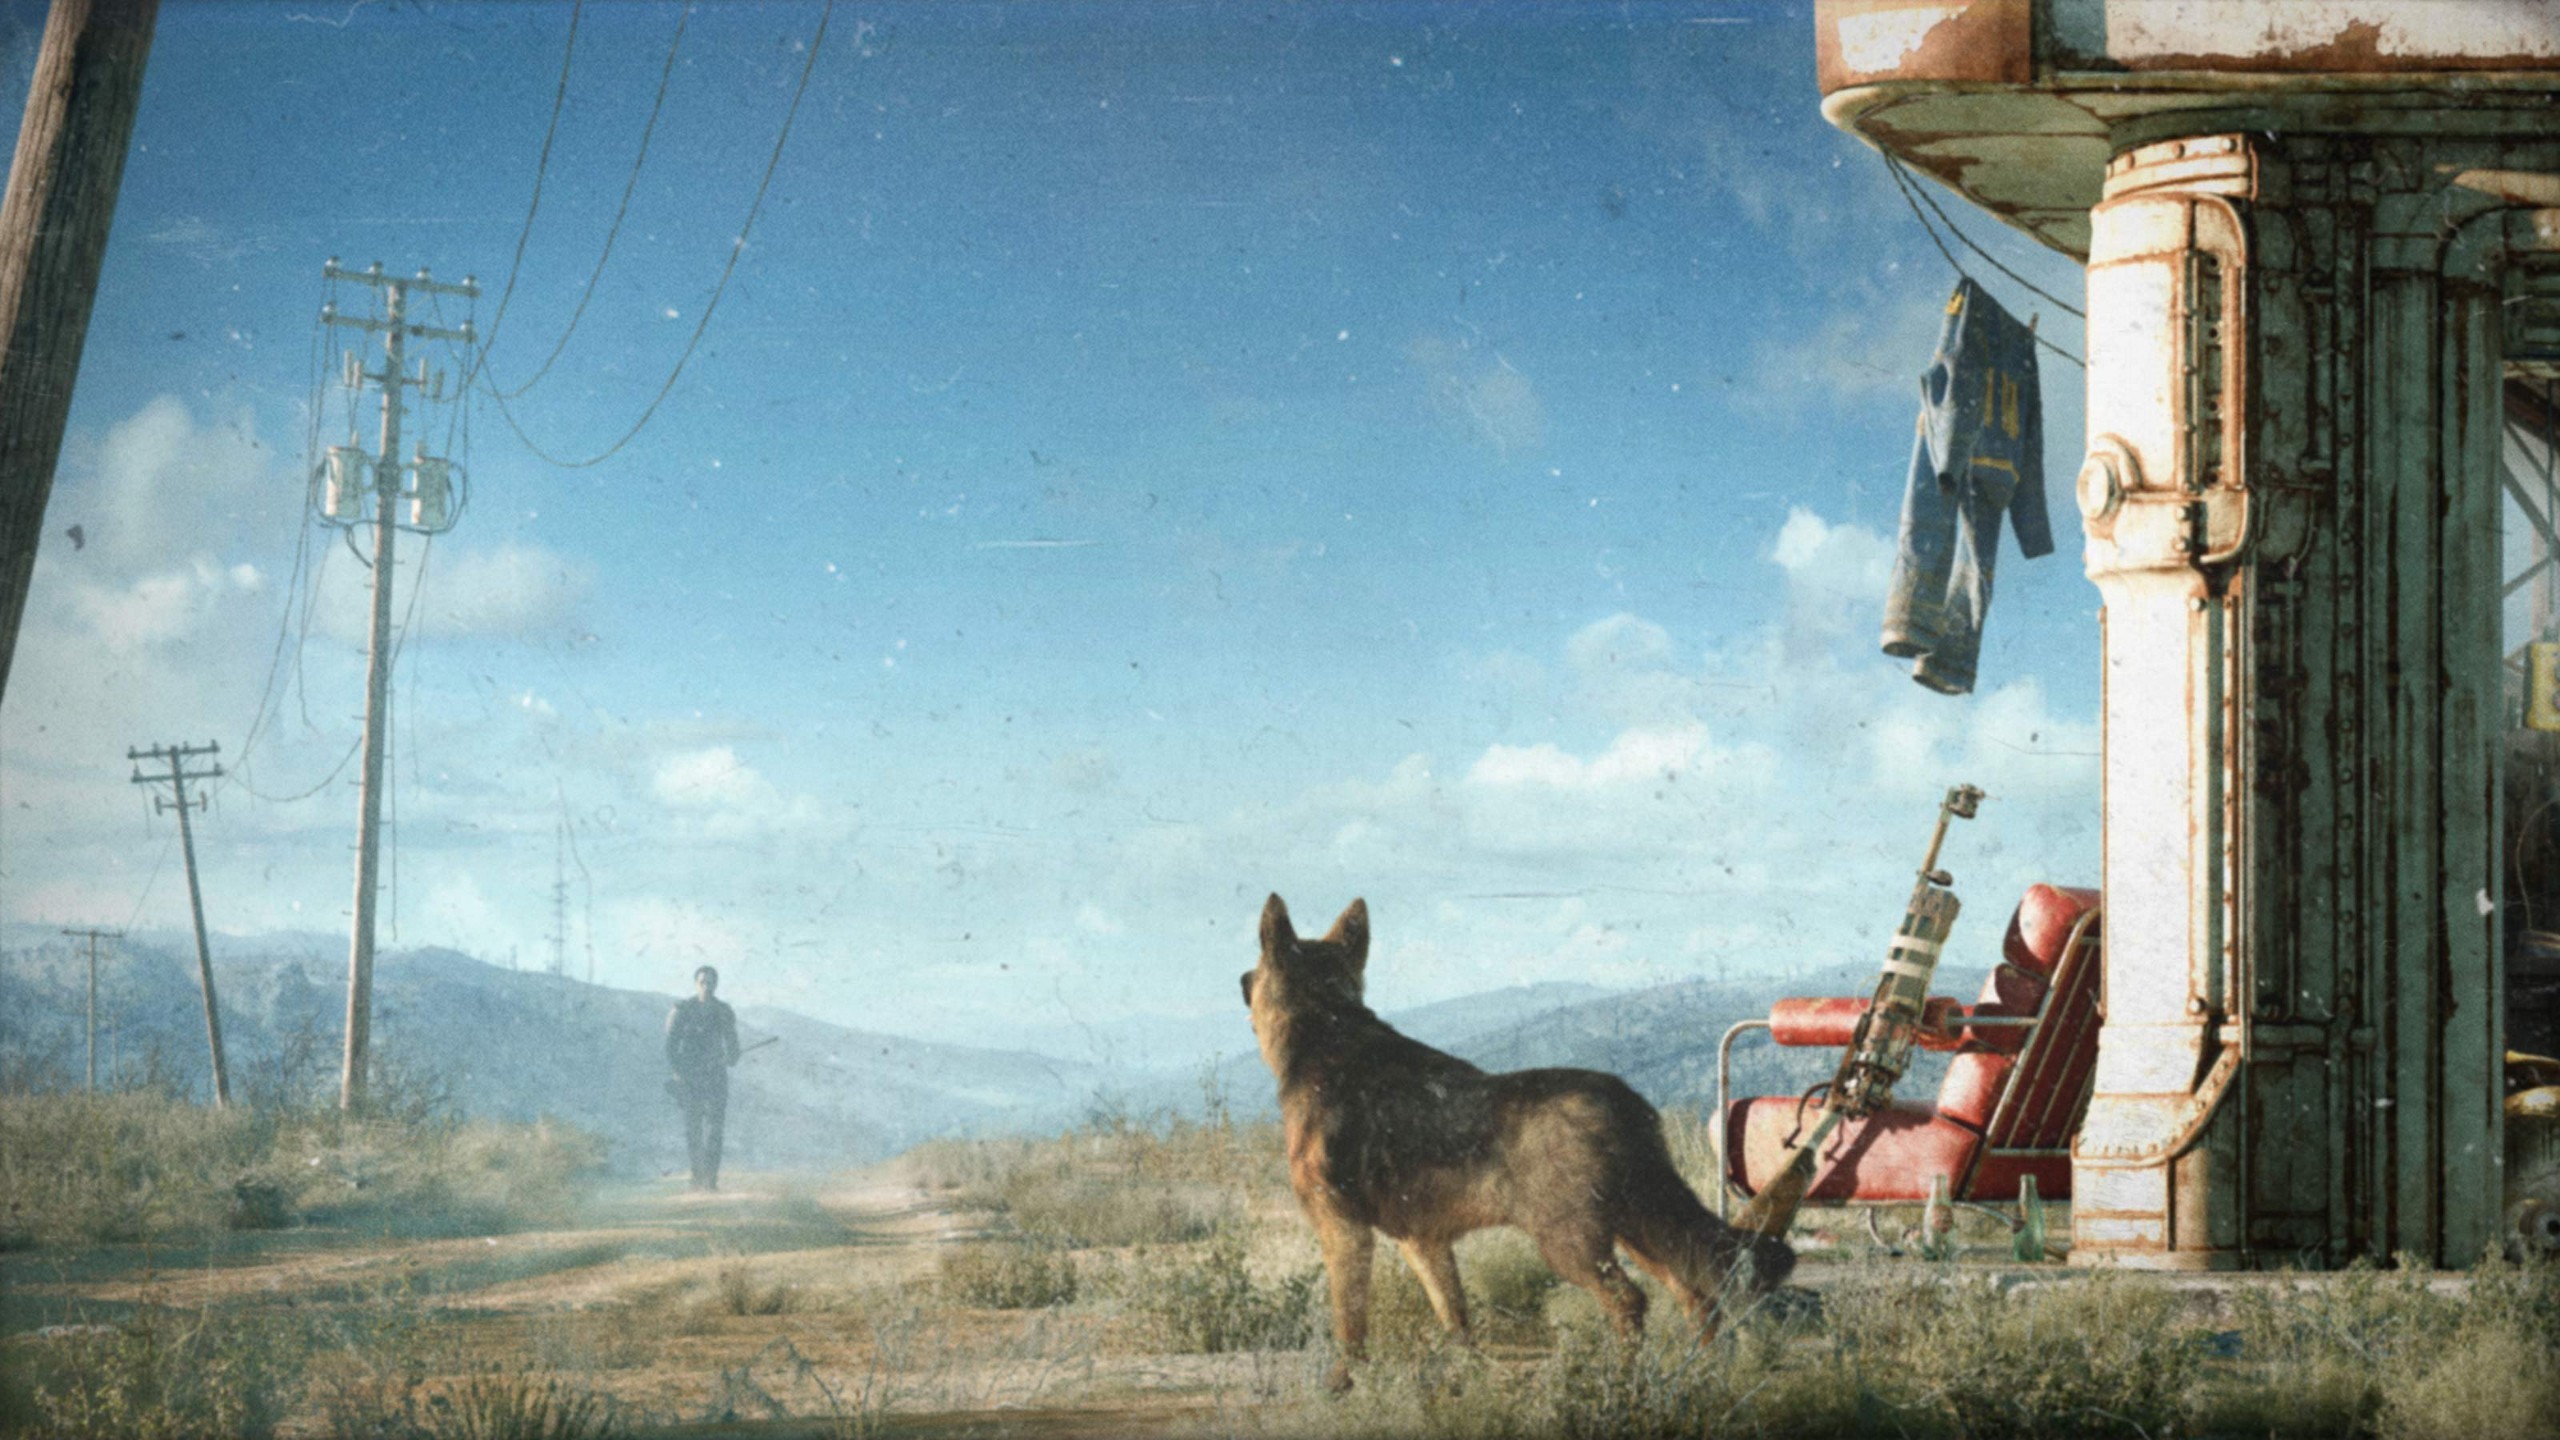 2560x1440 Fallout 4 Wallpapers Mobile On Wallpaper Hd 2560 x 1440 px 1.08 MB iphone 4  please